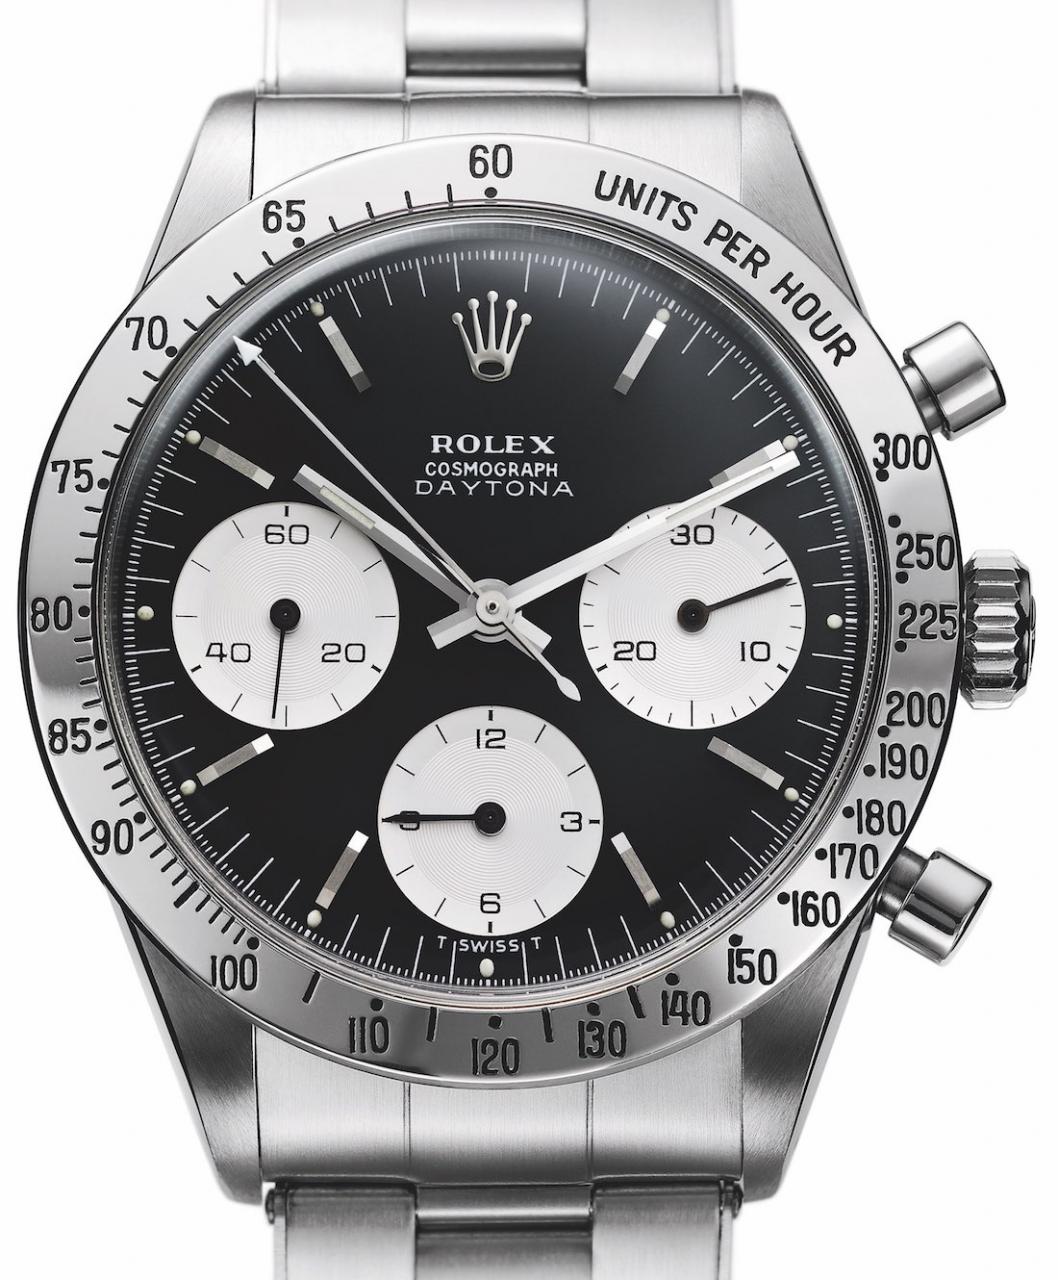 Rolex Daytona 116520 In Steel With Black Dial Watch Review Wrist Time Reviews 